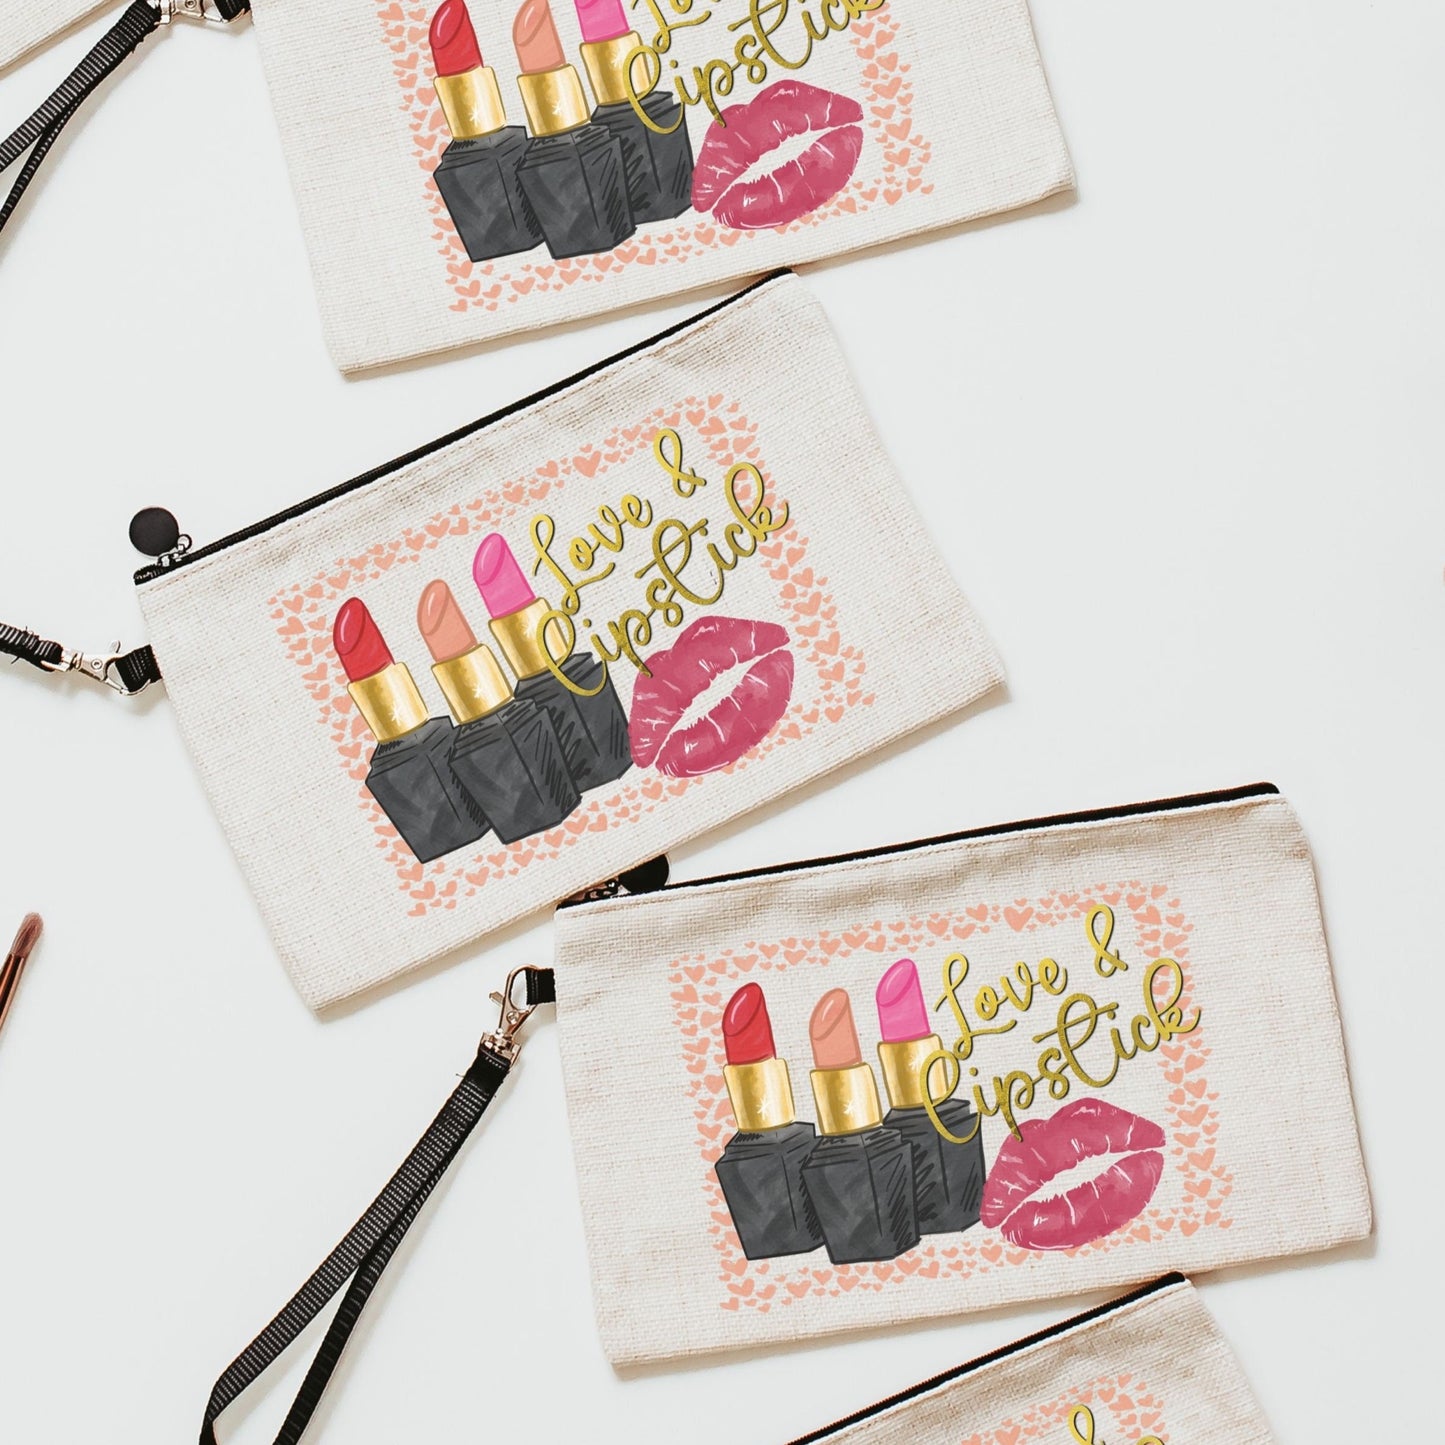 Trendy Makeup Bag with Love and Lipstick Design